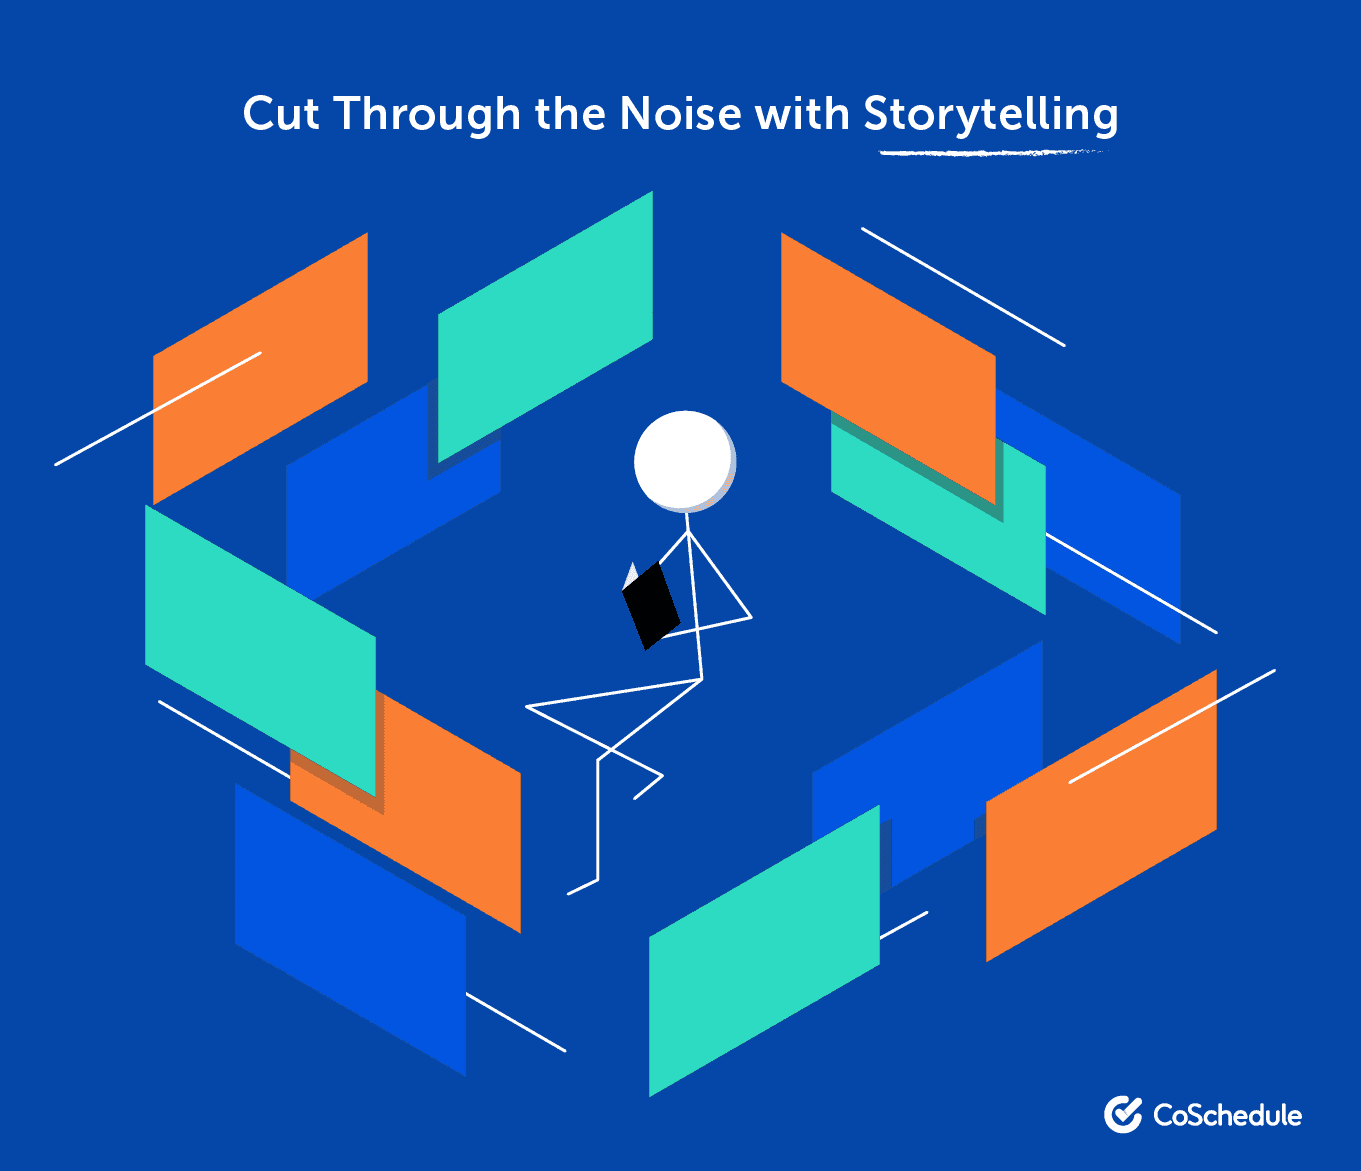 Cut through the noise with storytelling